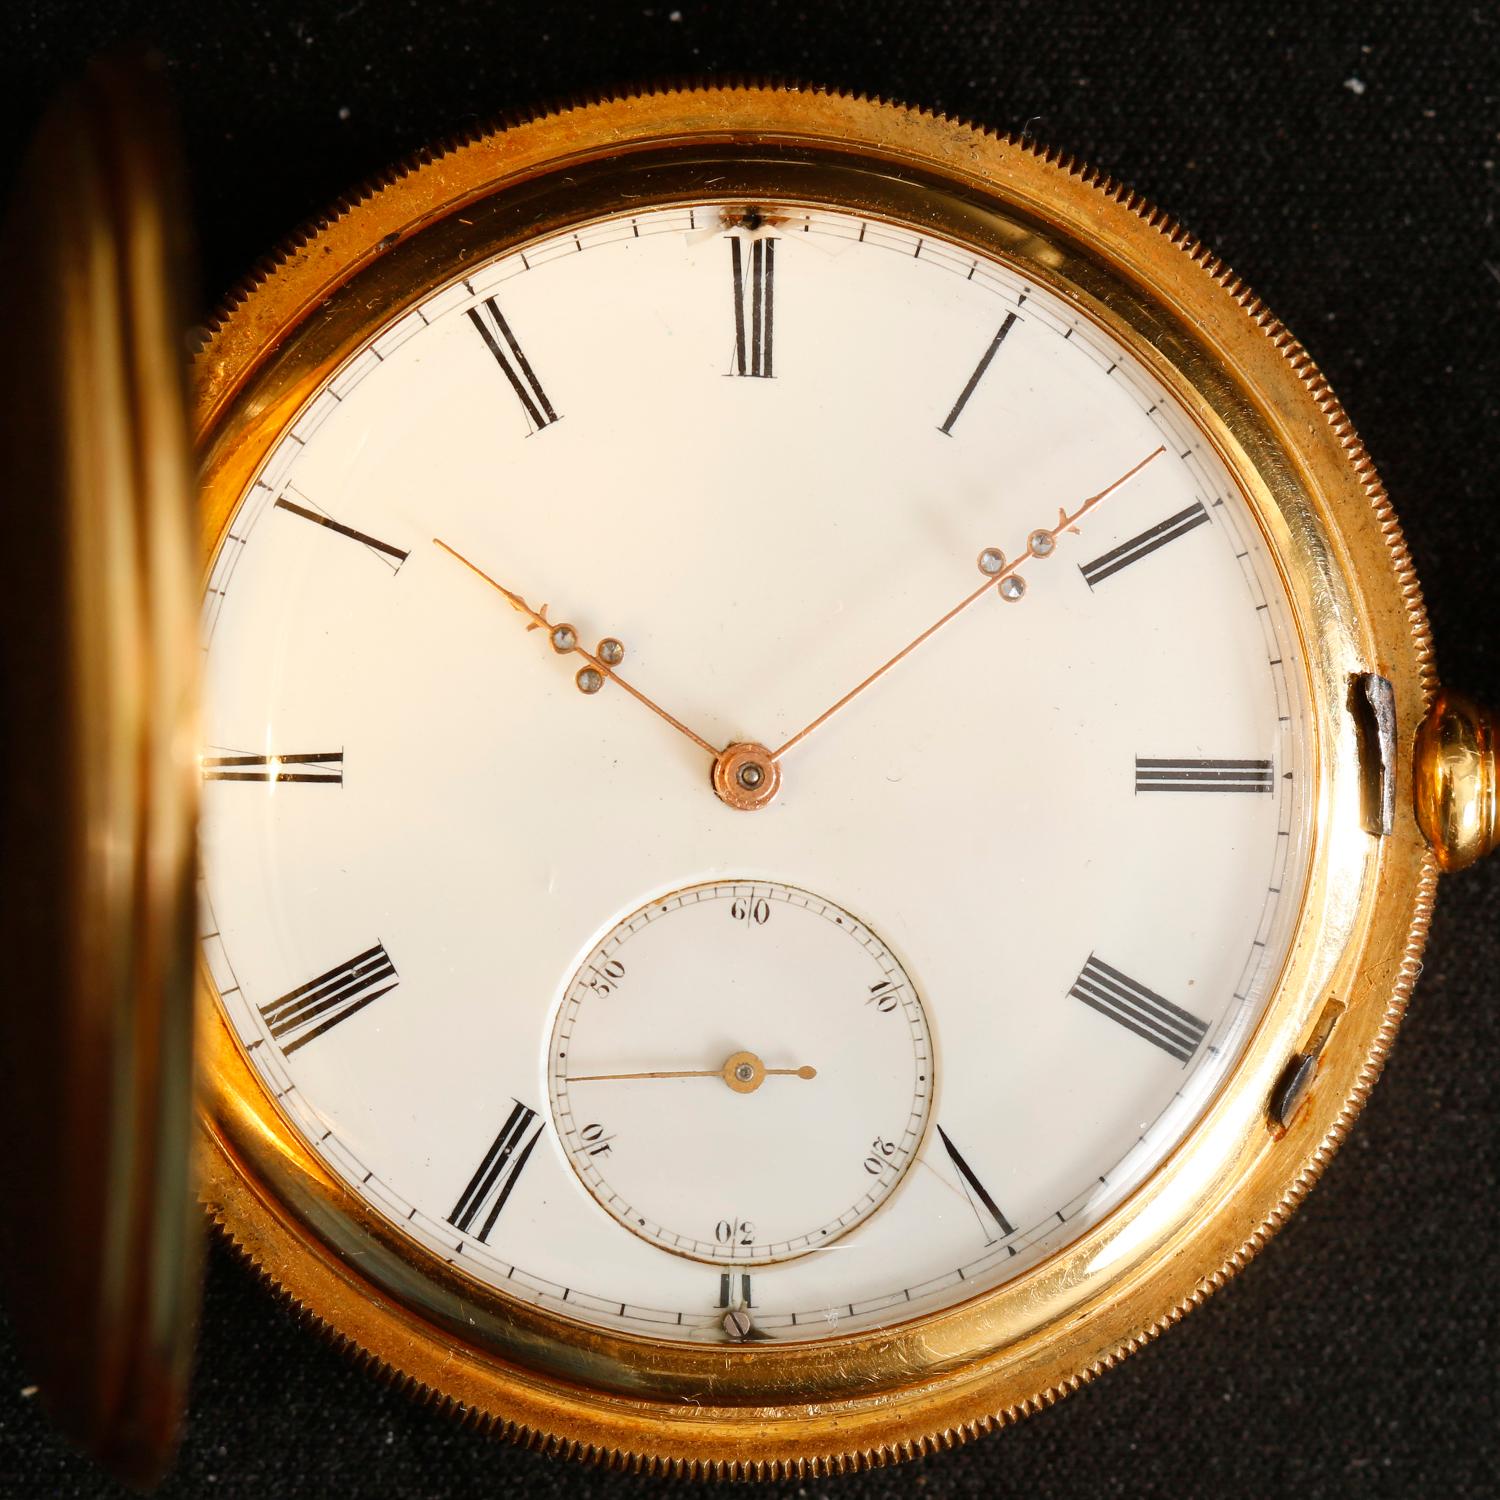 R. Lannier 18k Yellow Gold Men's Pocket Watch - Manual winding; pivoted detent pocket chronometer. 18k yellow gold with initials  (51  mm diameter). White dial with Roman numerals; subdial at 6 o'clock. Pre-owned with custom box.  Extremely high